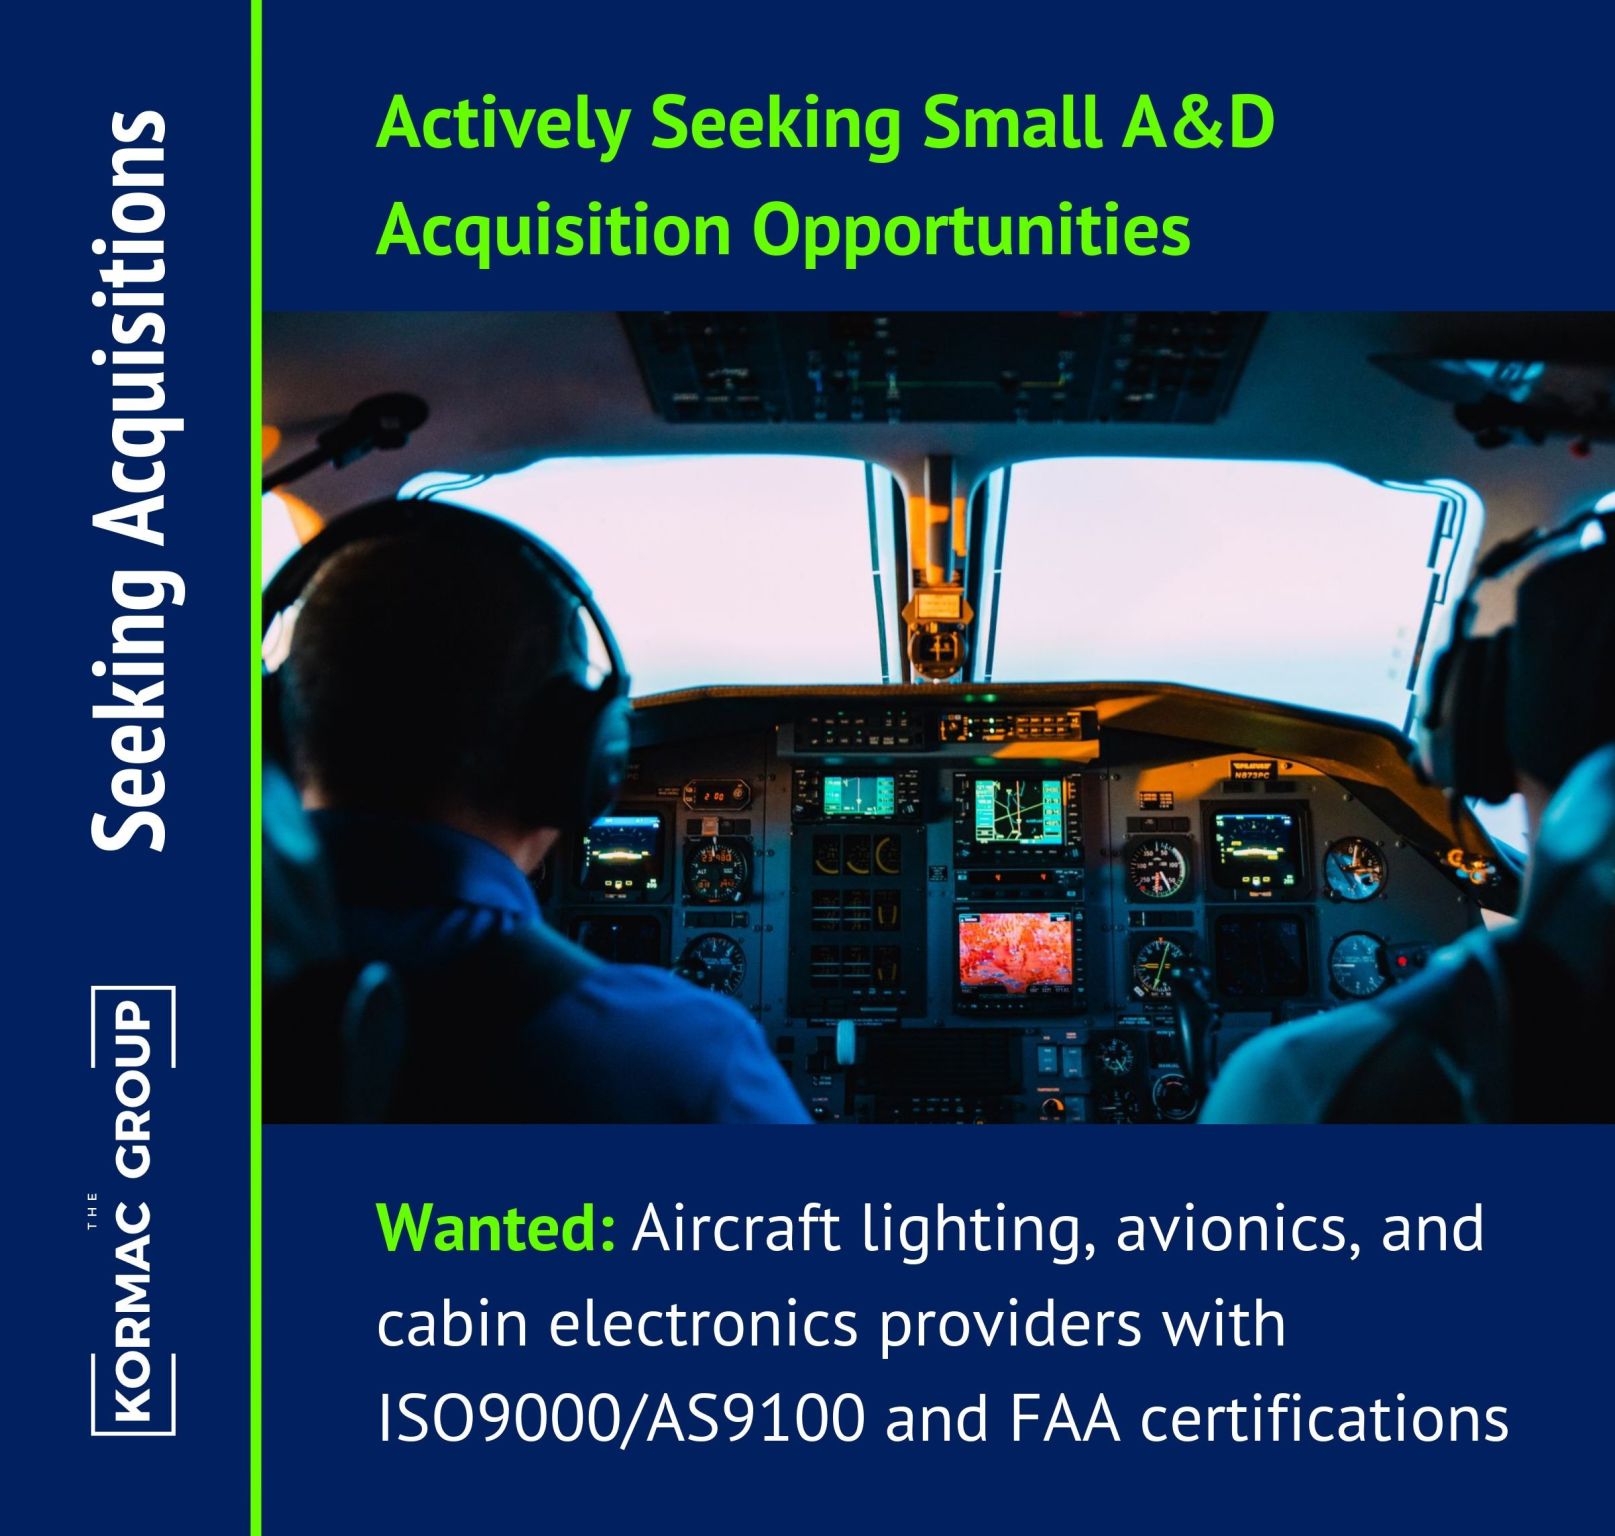 Seeking Acquisitions Actively Seeking Small A&D Acquisition Opportunities Wanted: Aircraft lighting, avionics, and cabin electronics providers with ISO9000/AS9100 and FAA certifications